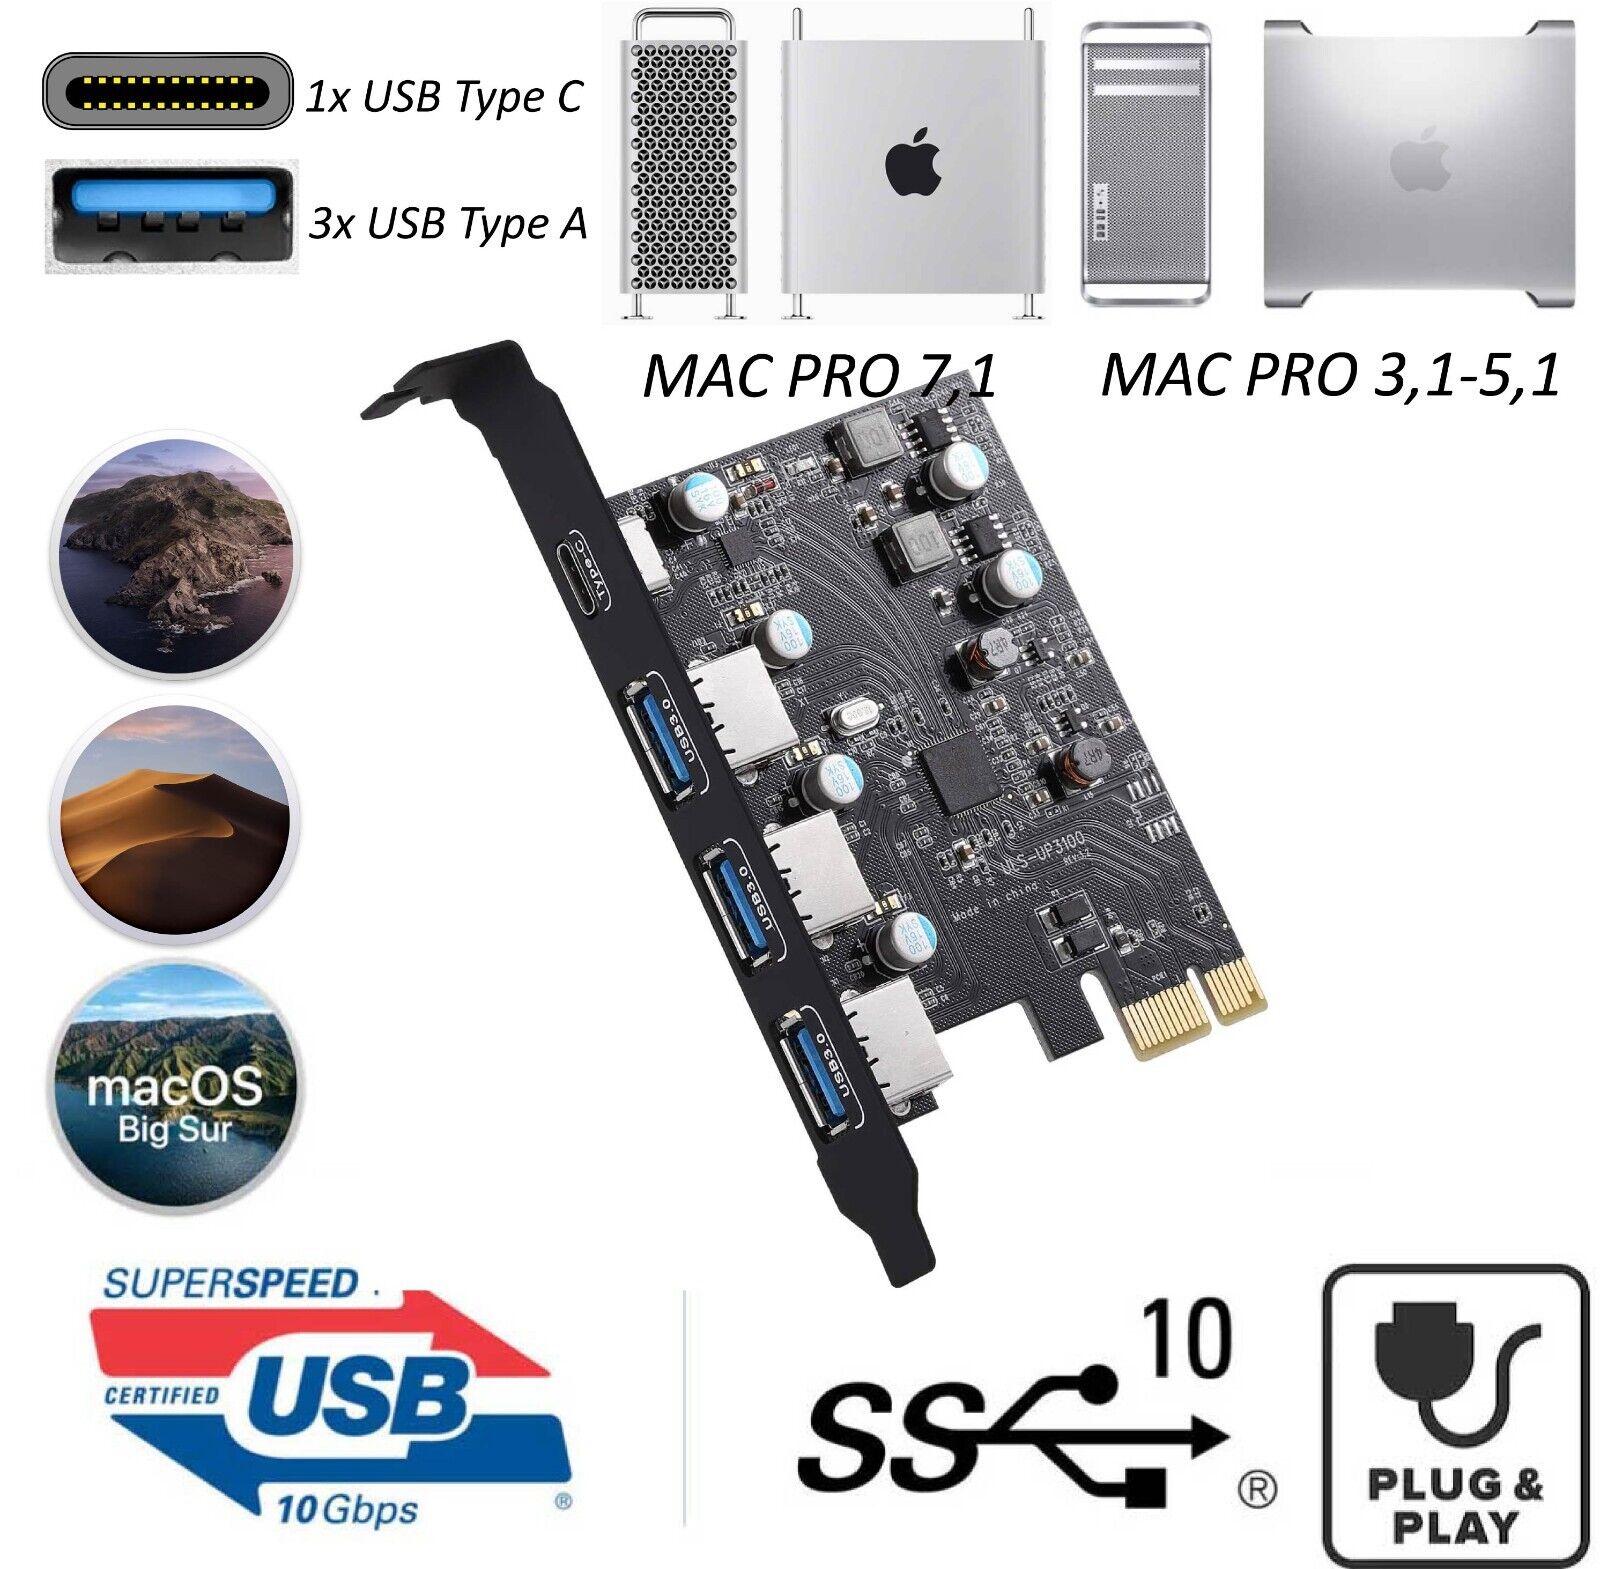 USB 3.1 Type-A & Type C MAC PRO PCIe Card - Plug and Play Supports 3,1 4,1 5,1